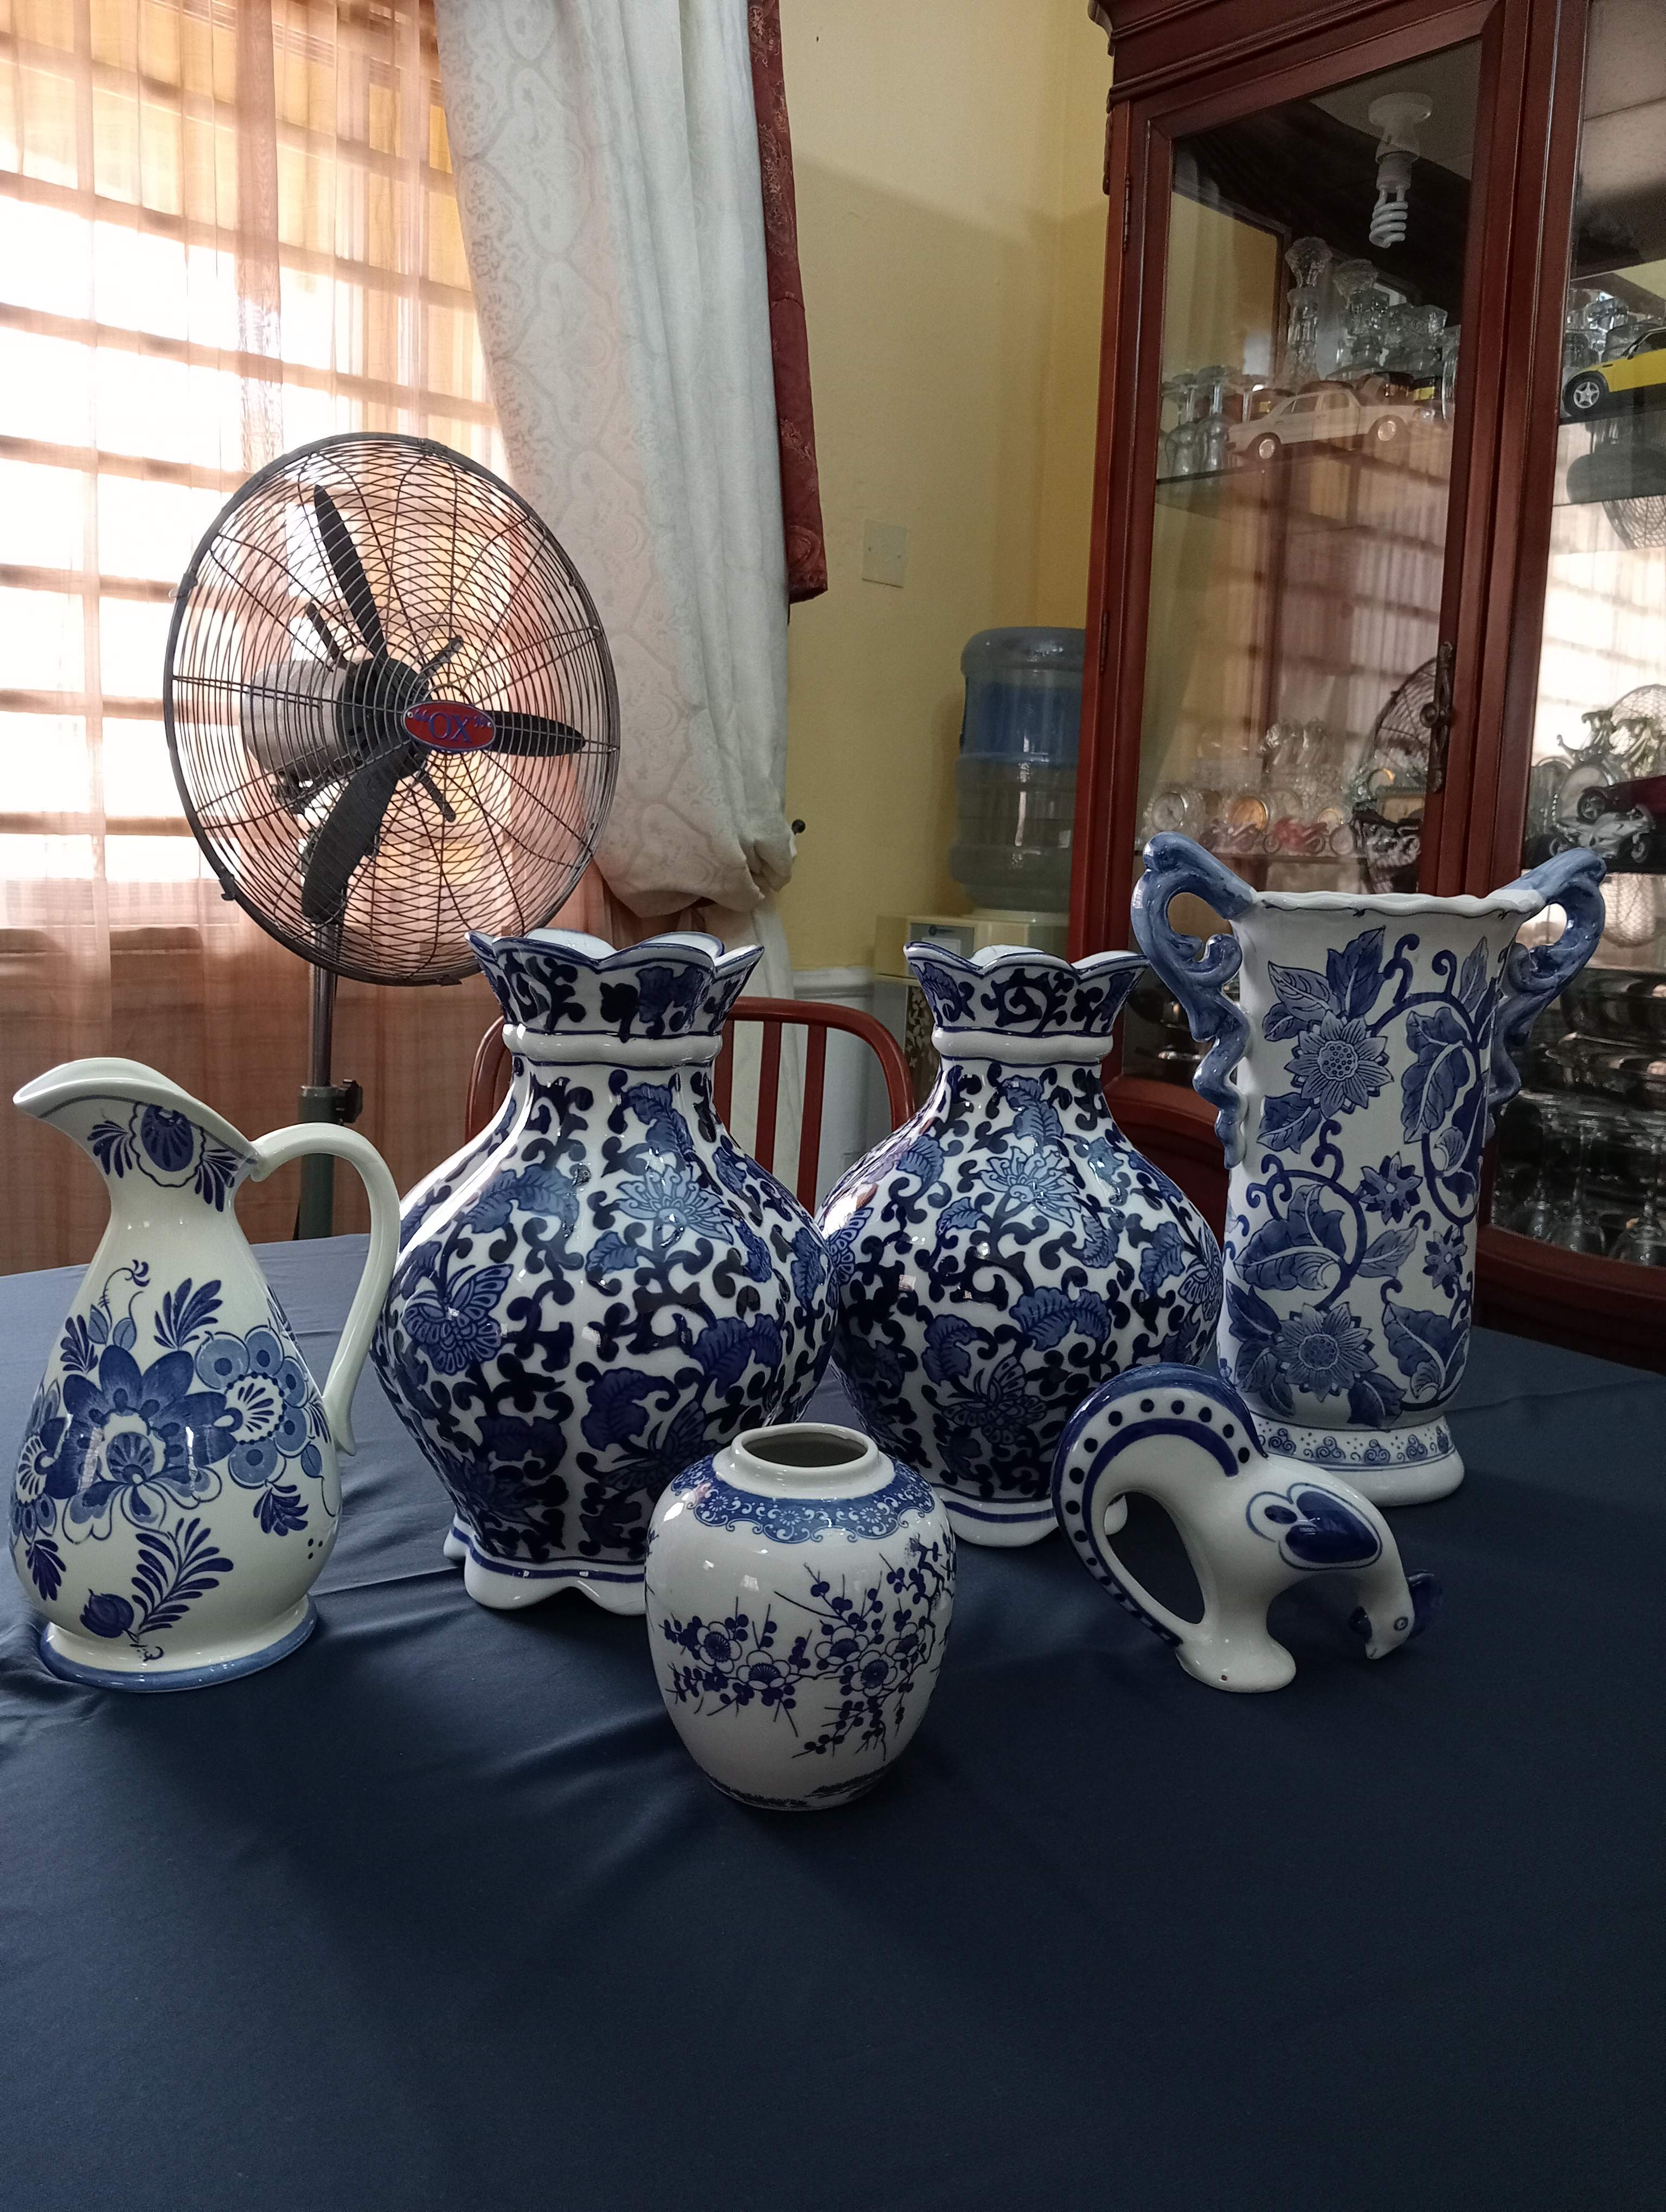 No Stately home is complete without a collection of Blue and White China.